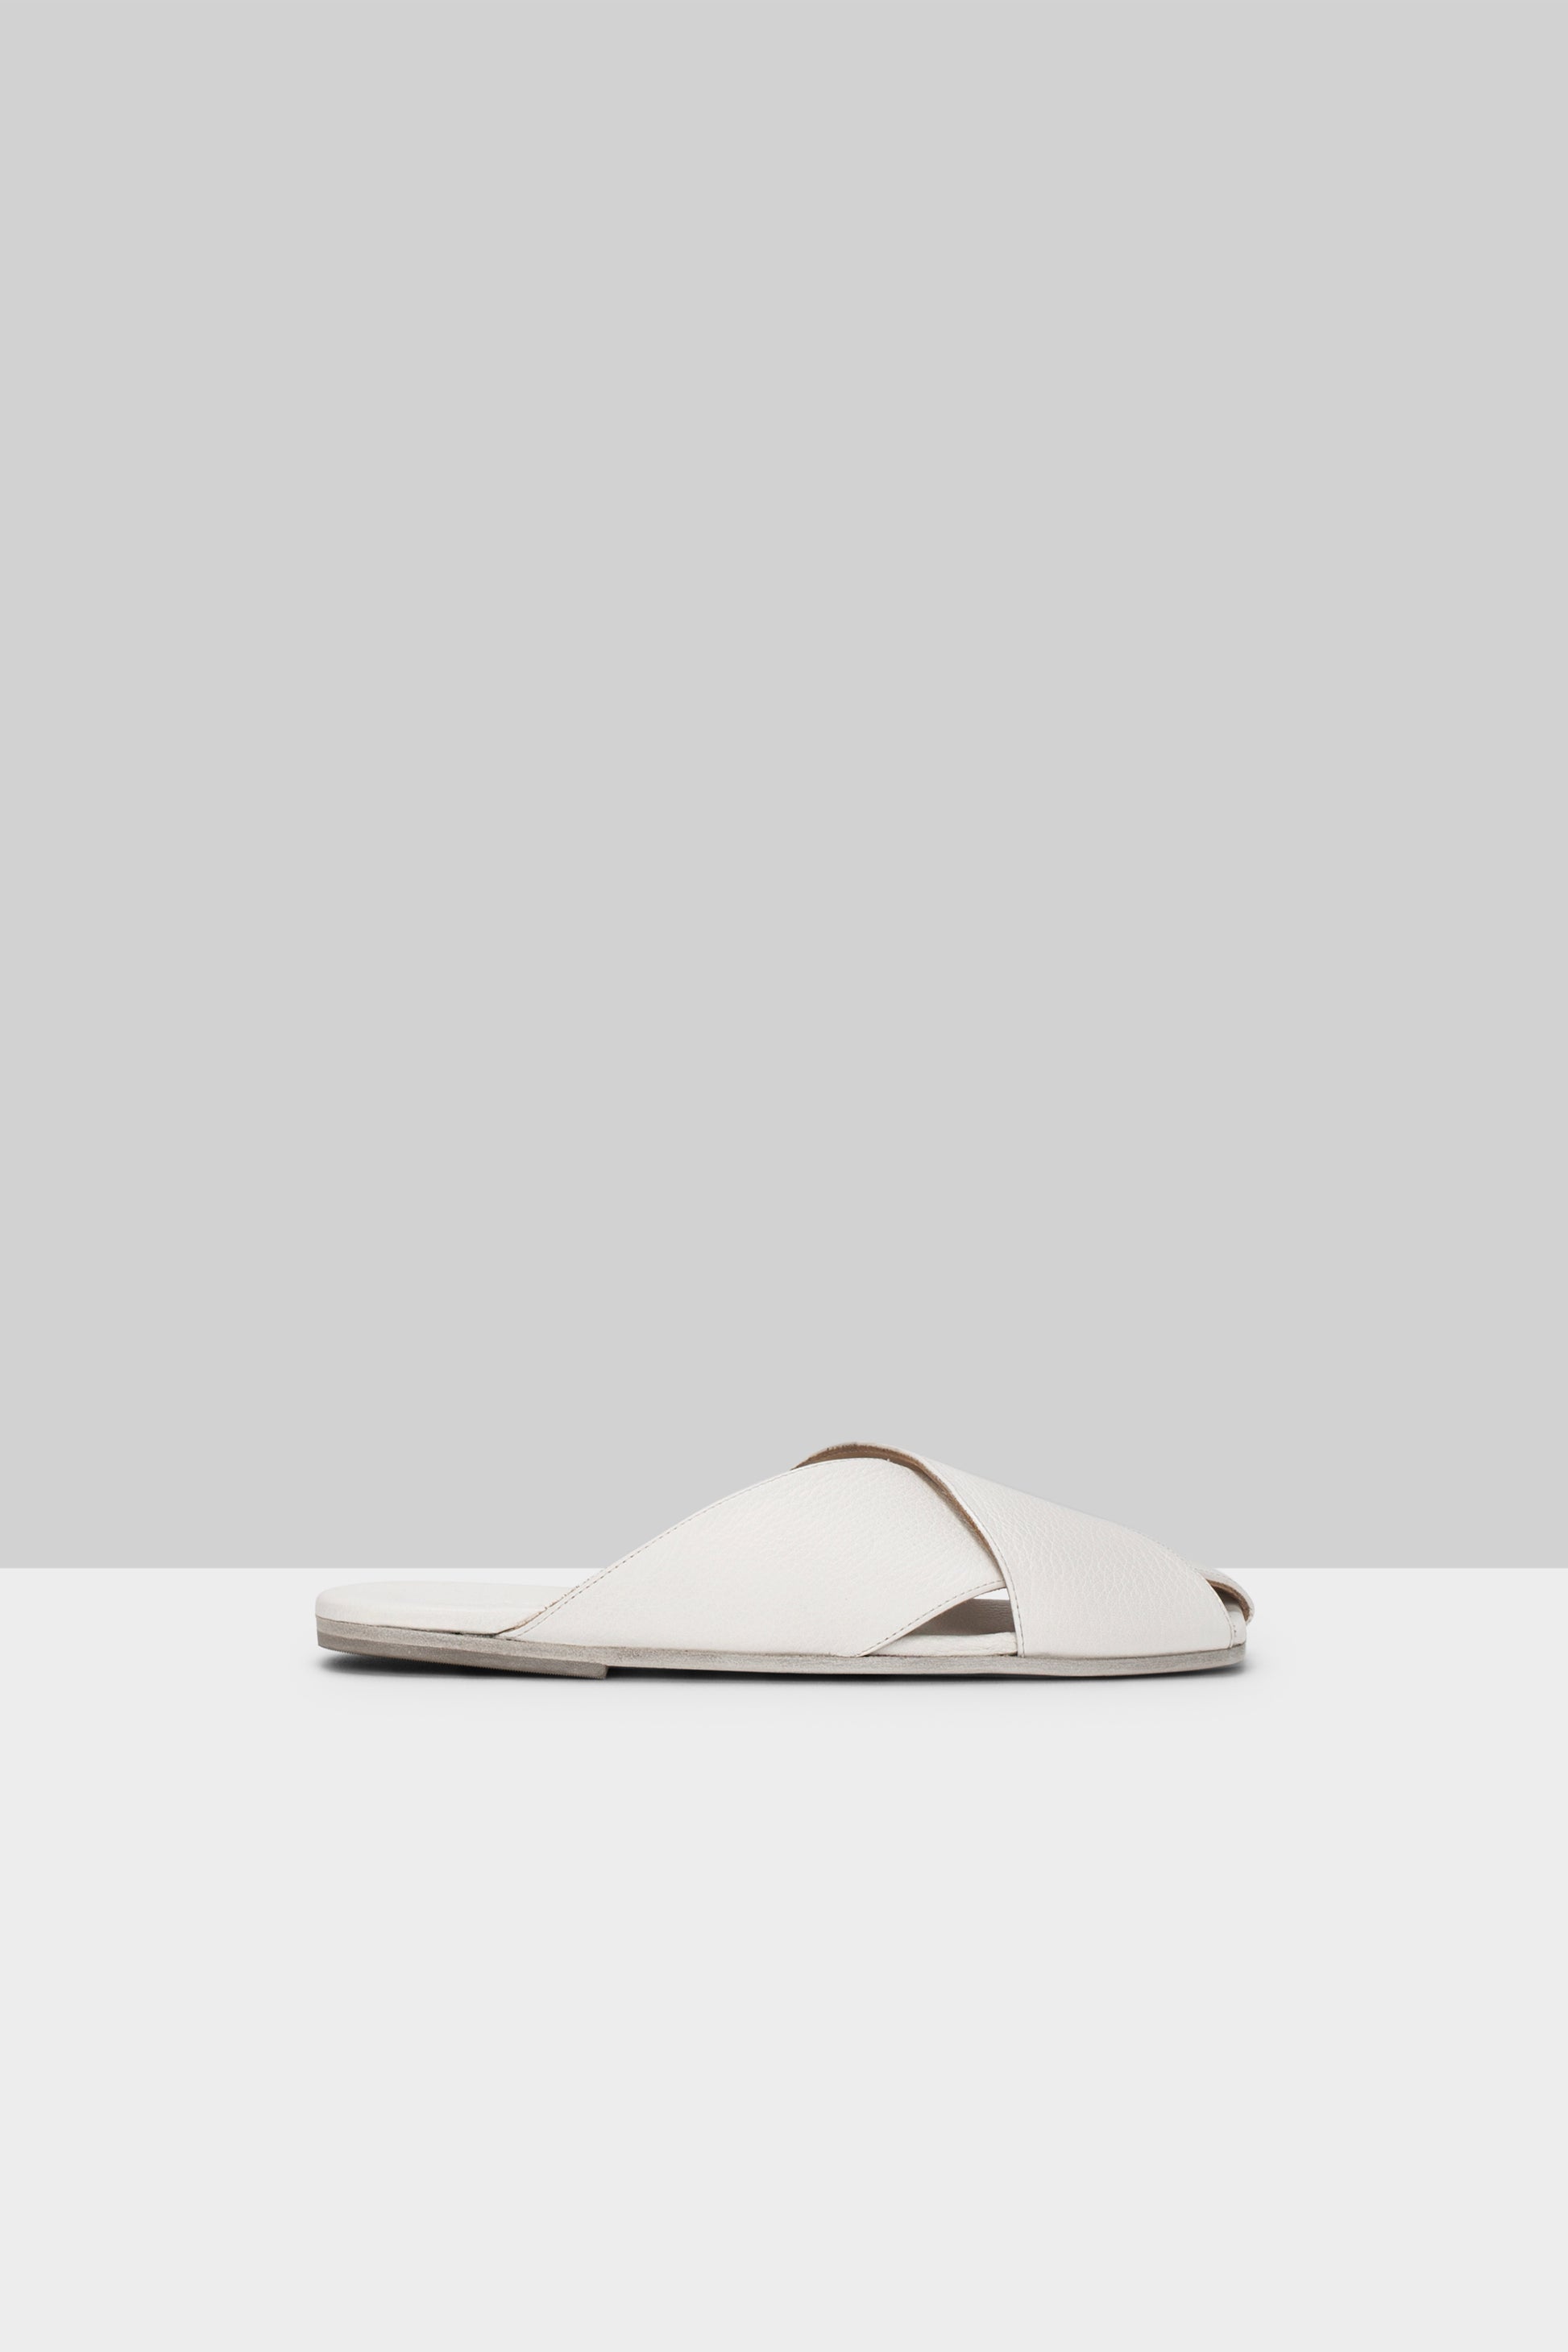 MARSÈLL Spatola Crossover Leather Slide in Optical White